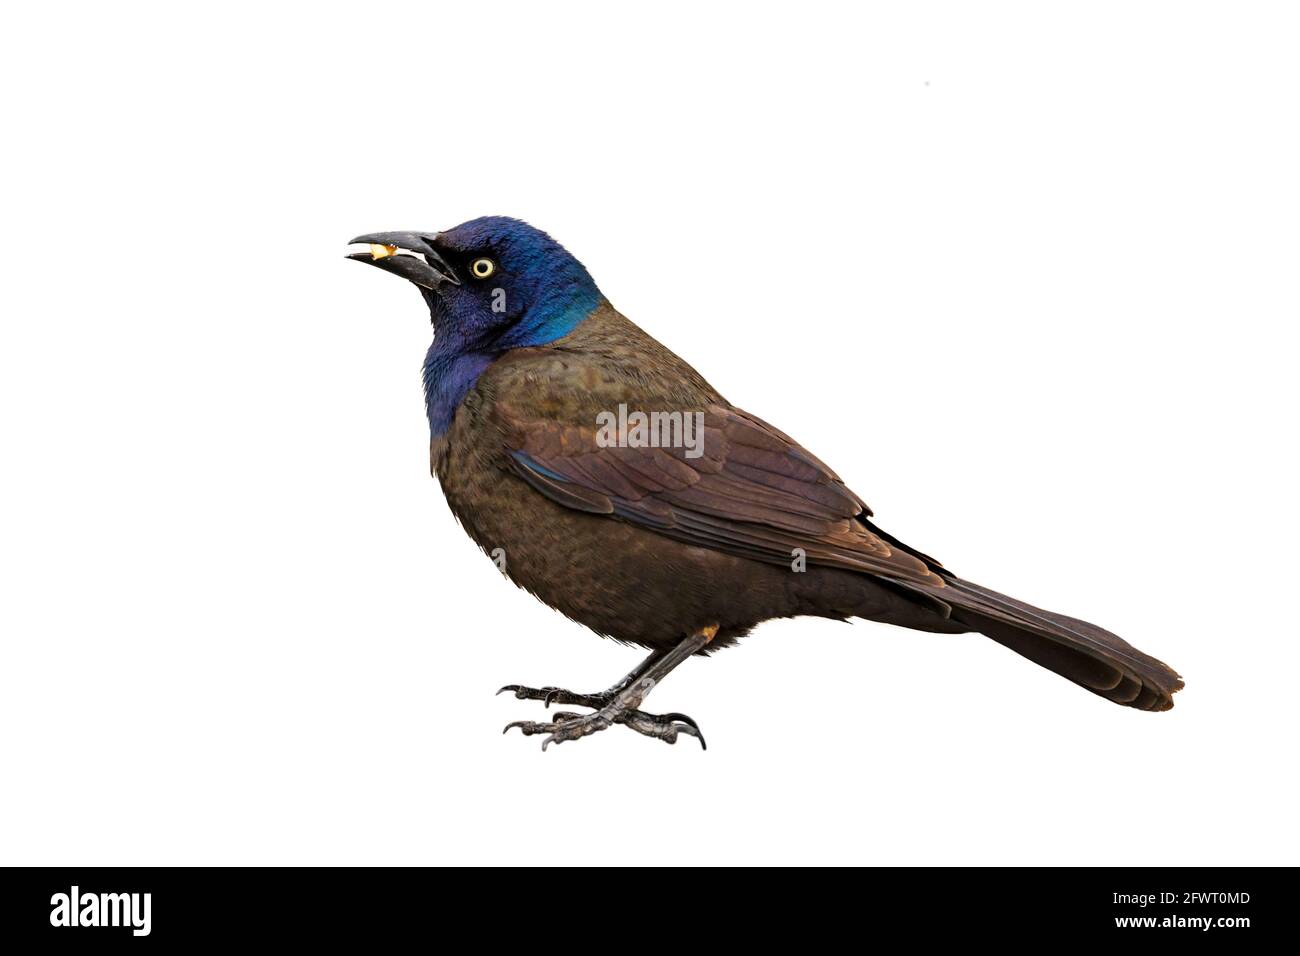 Common Grackle bird Cut out, on a White Background (Quiscalus quiscula), Adult Bird Stock Photo